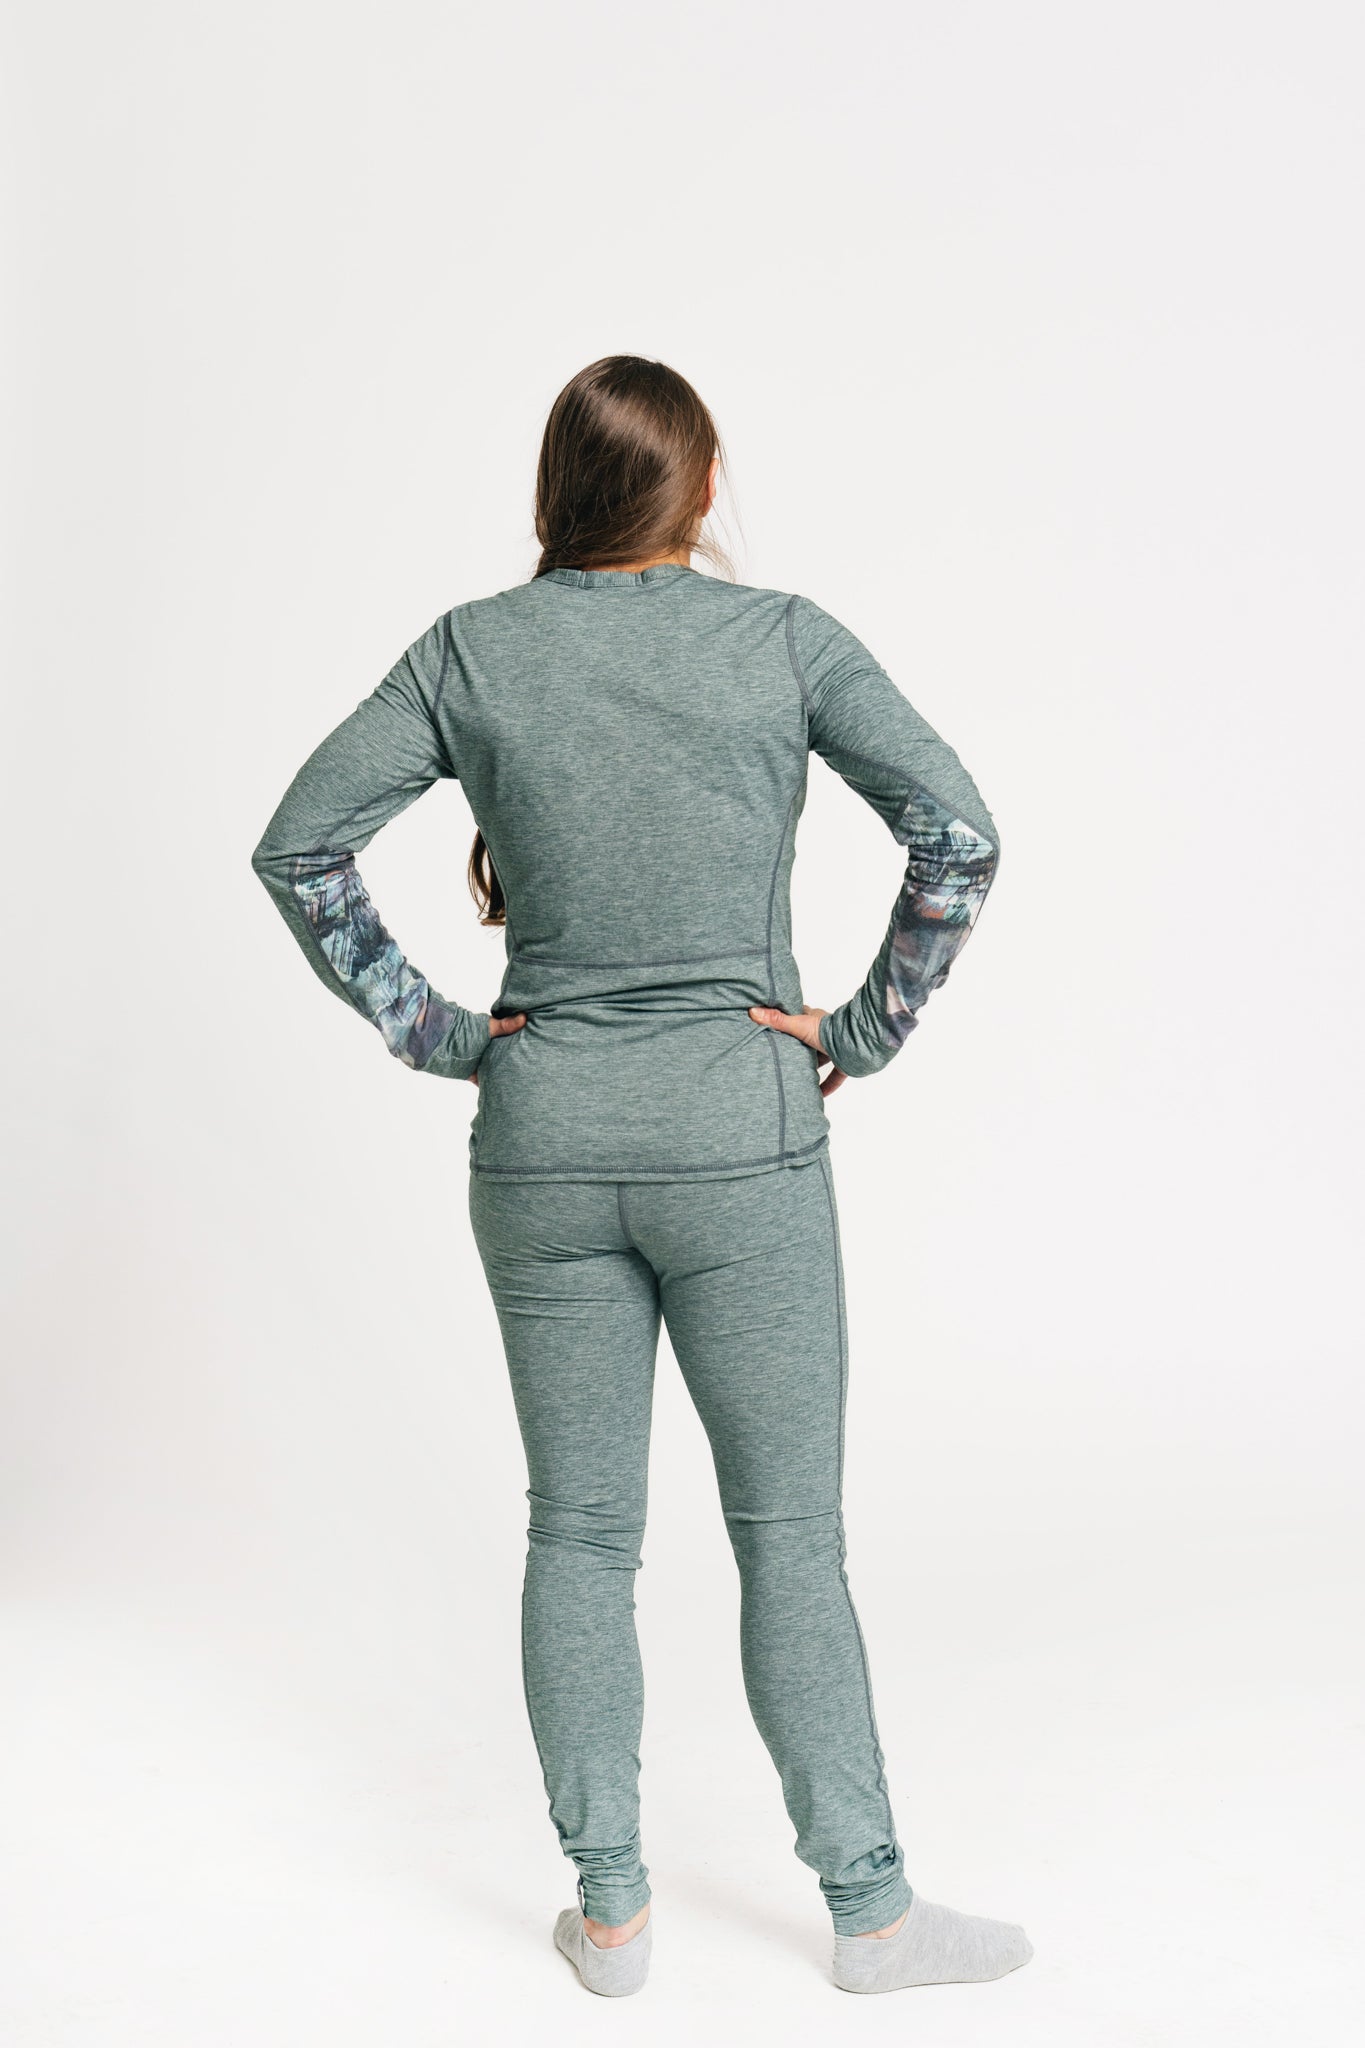 alpine fit green base layer top and bottom viewed from the back